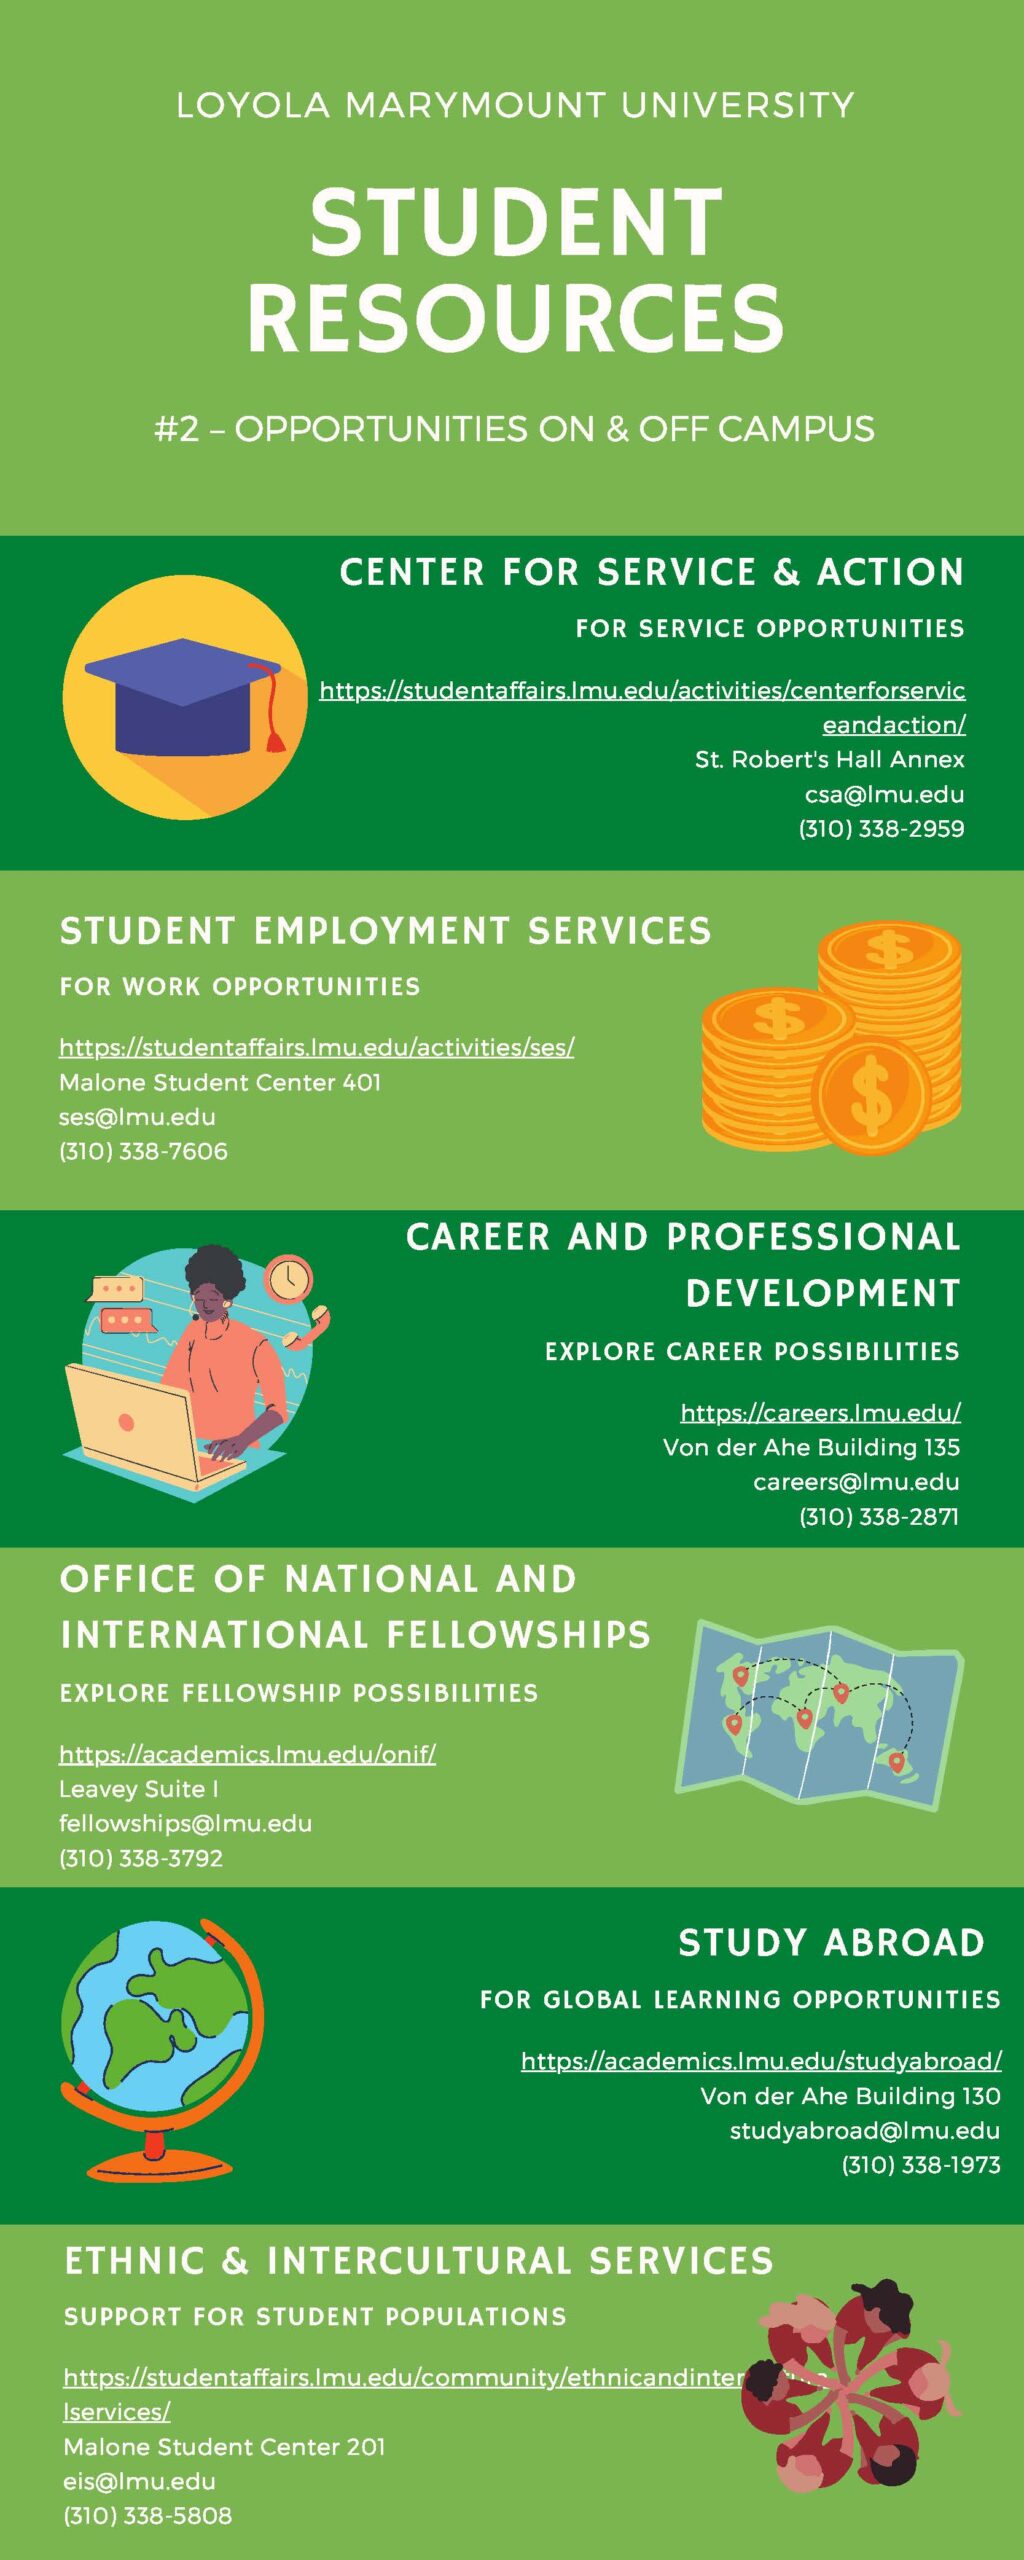 Infographic for opportunities on and off campus